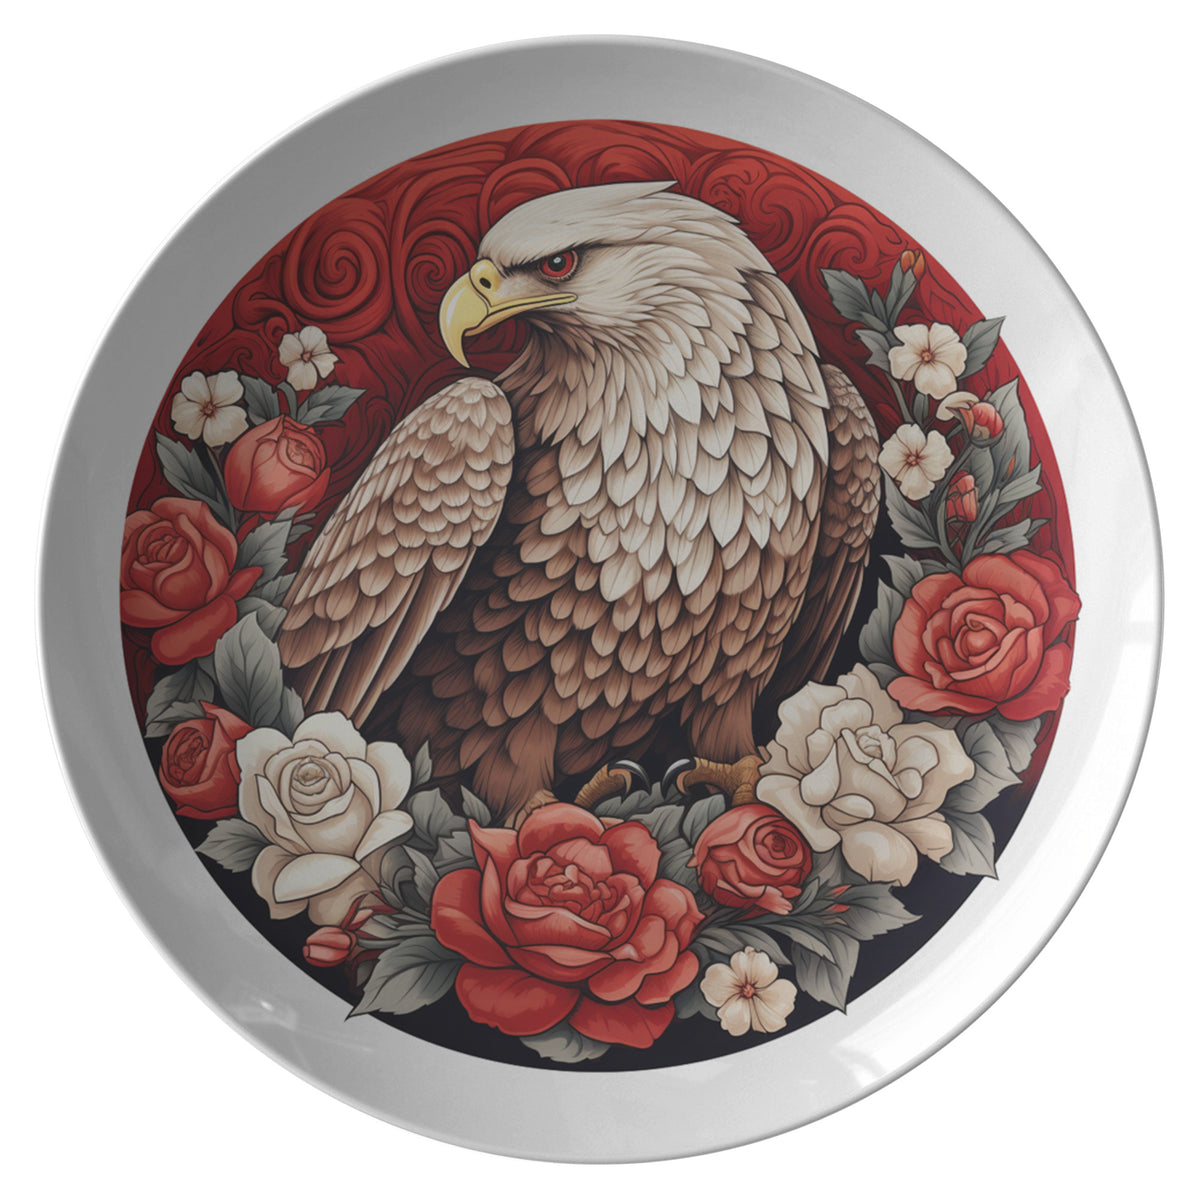 Eagle With Red &amp; White Roses Plate Kitchenware teelaunch   